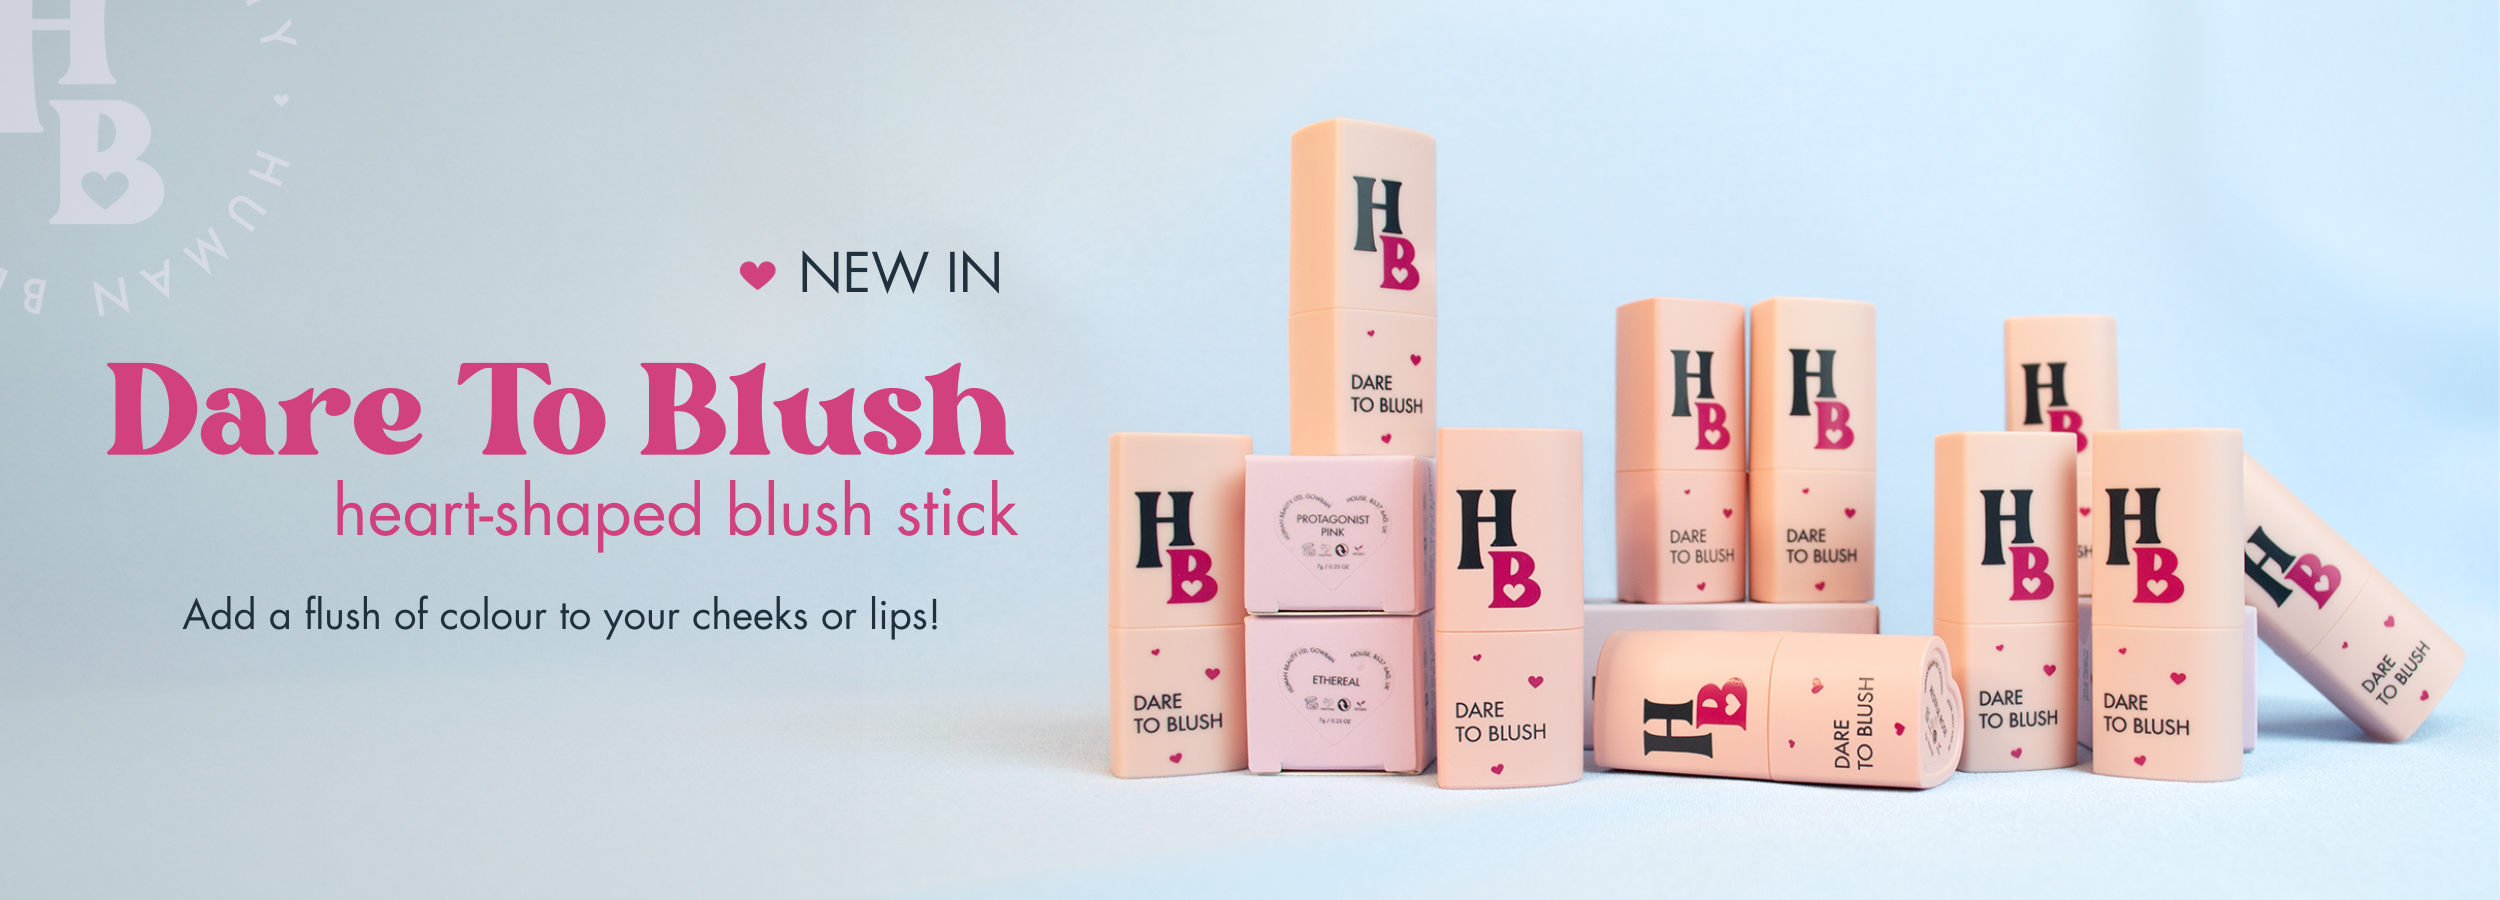 Visual of the entire blush collection with the text "New in: Dare To Blush heart-shaped blush stick - add a flush of colour to your cheeks and lips!"